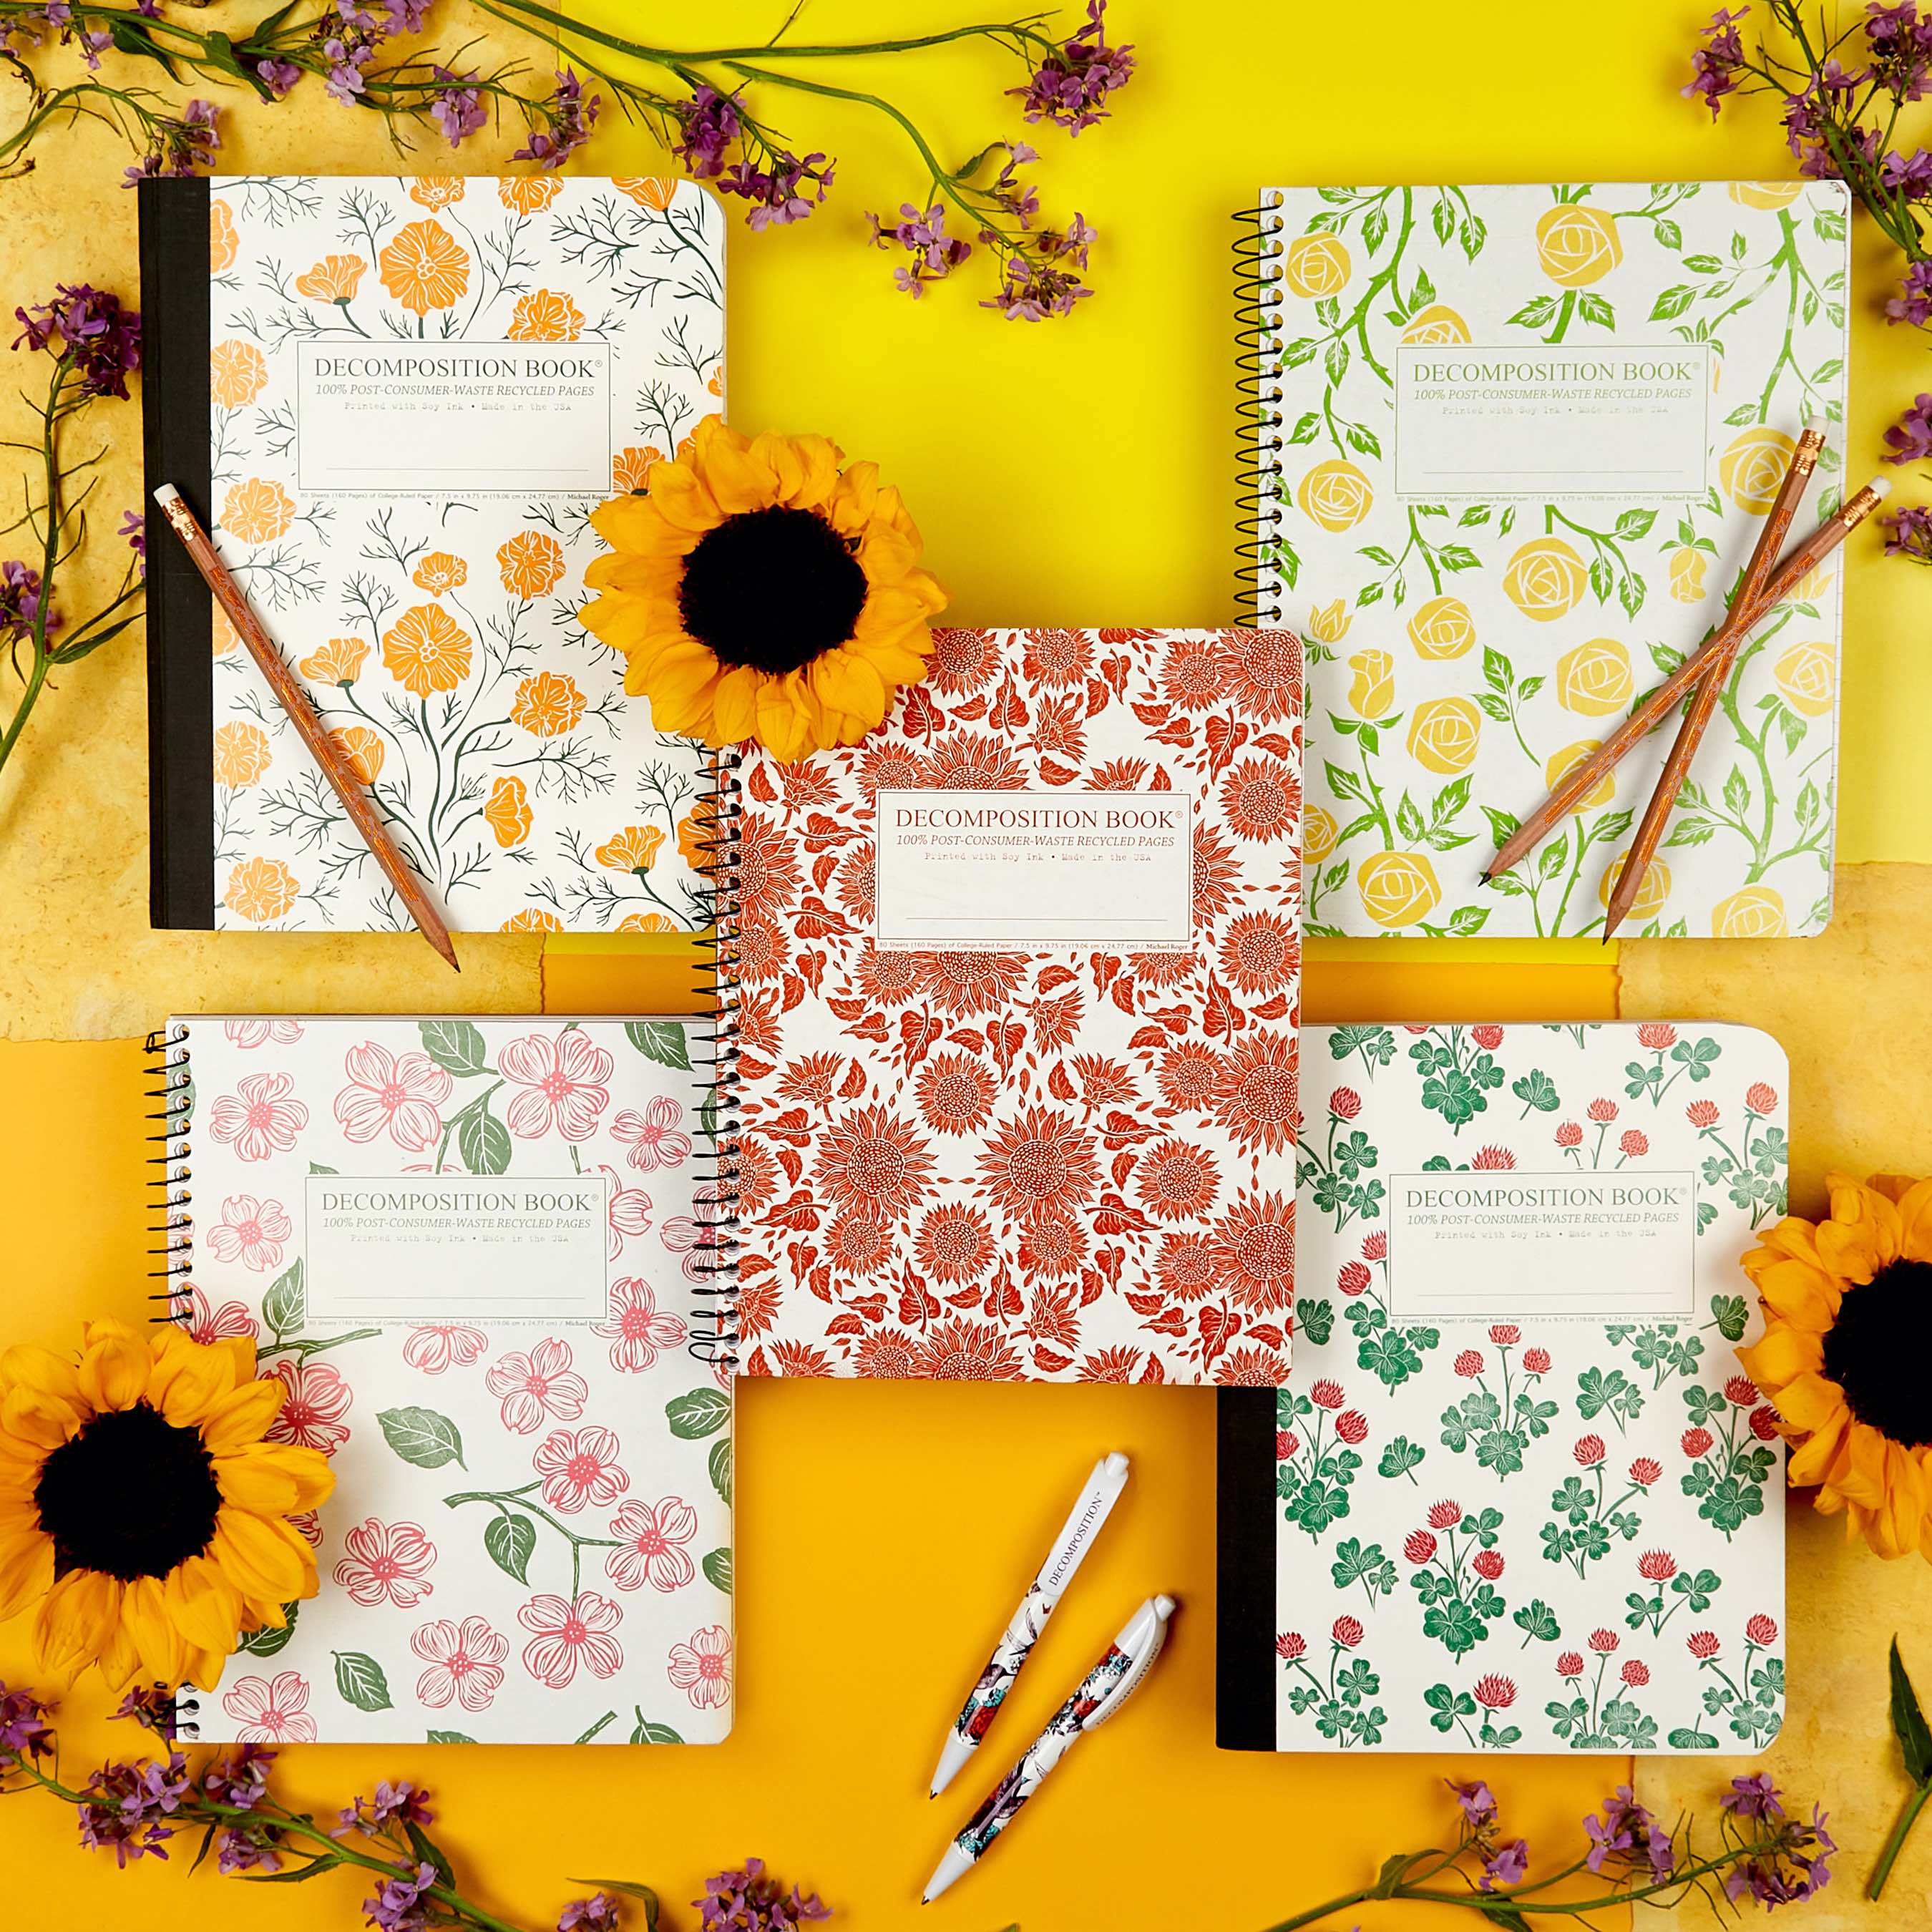 Five colorful notebooks and writing utensils